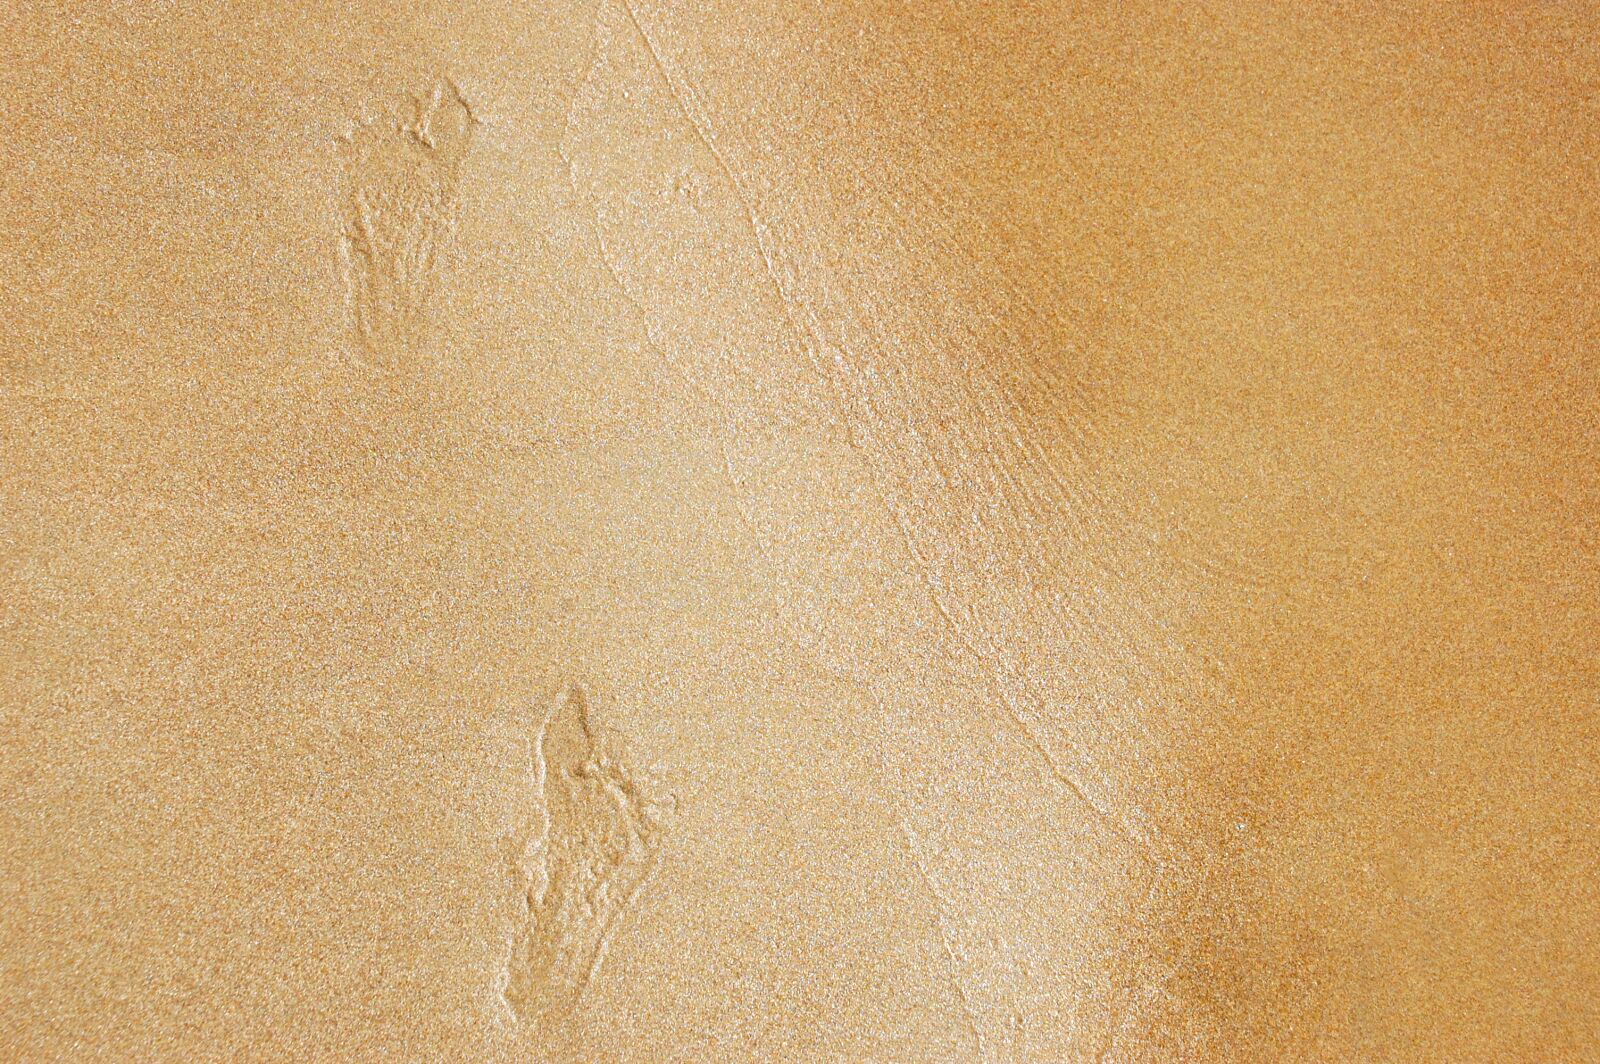 Nikon D40 + Tamron AF 18-270mm F3.5-6.3 Di II VC LD Aspherical (IF) MACRO sample photo. Footprints in the sand photography